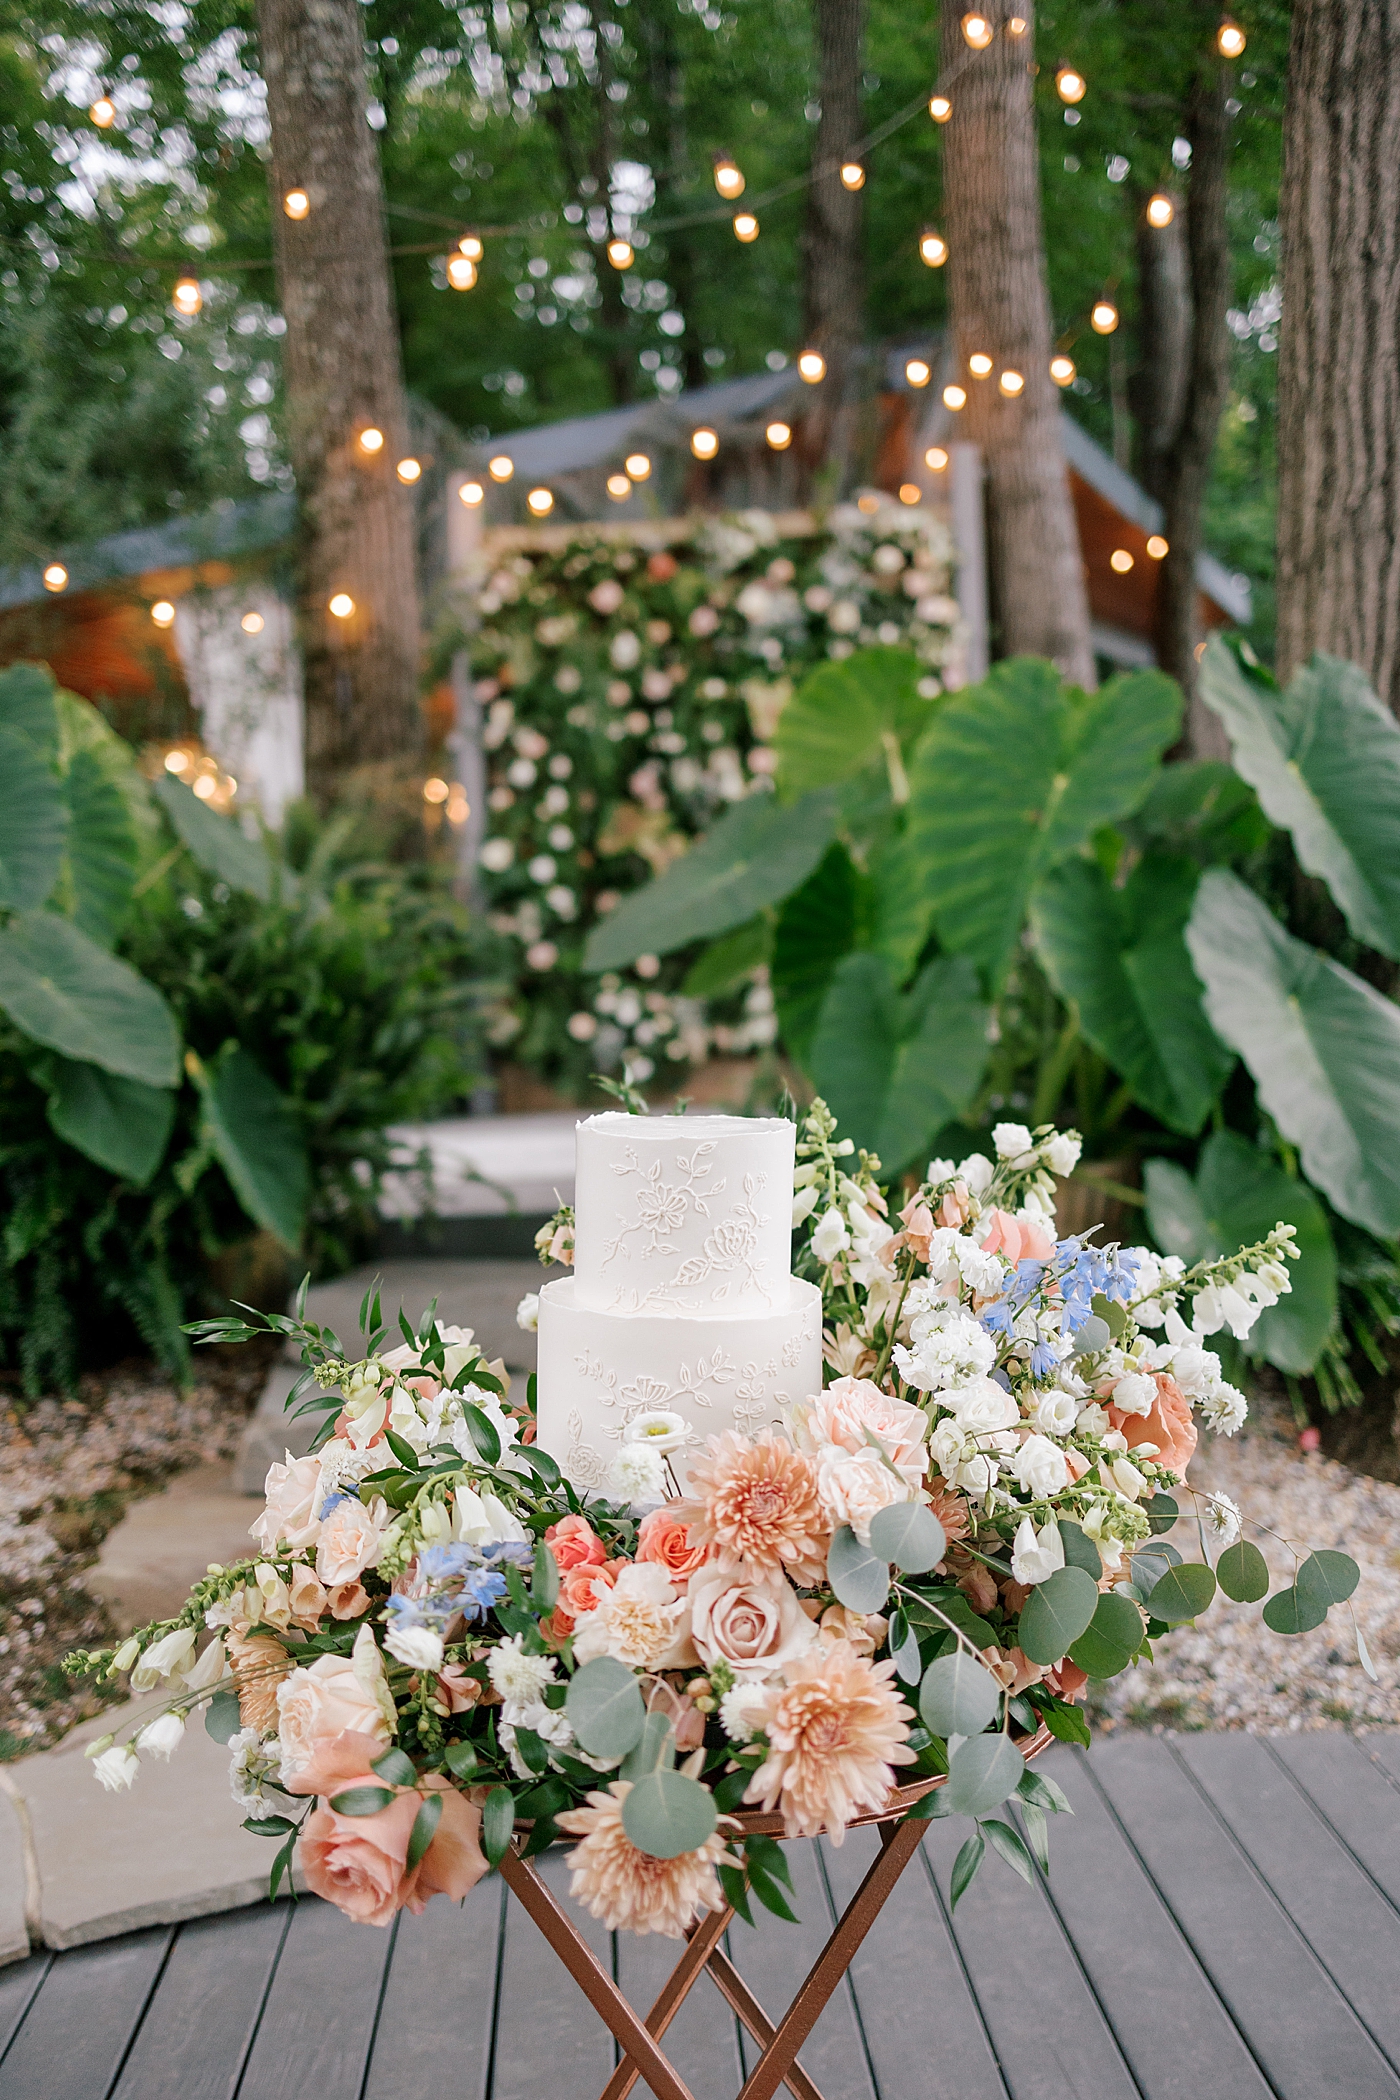 Wedding cake decorated with beautiful flowers | Image by Hope Helmuth Photography 